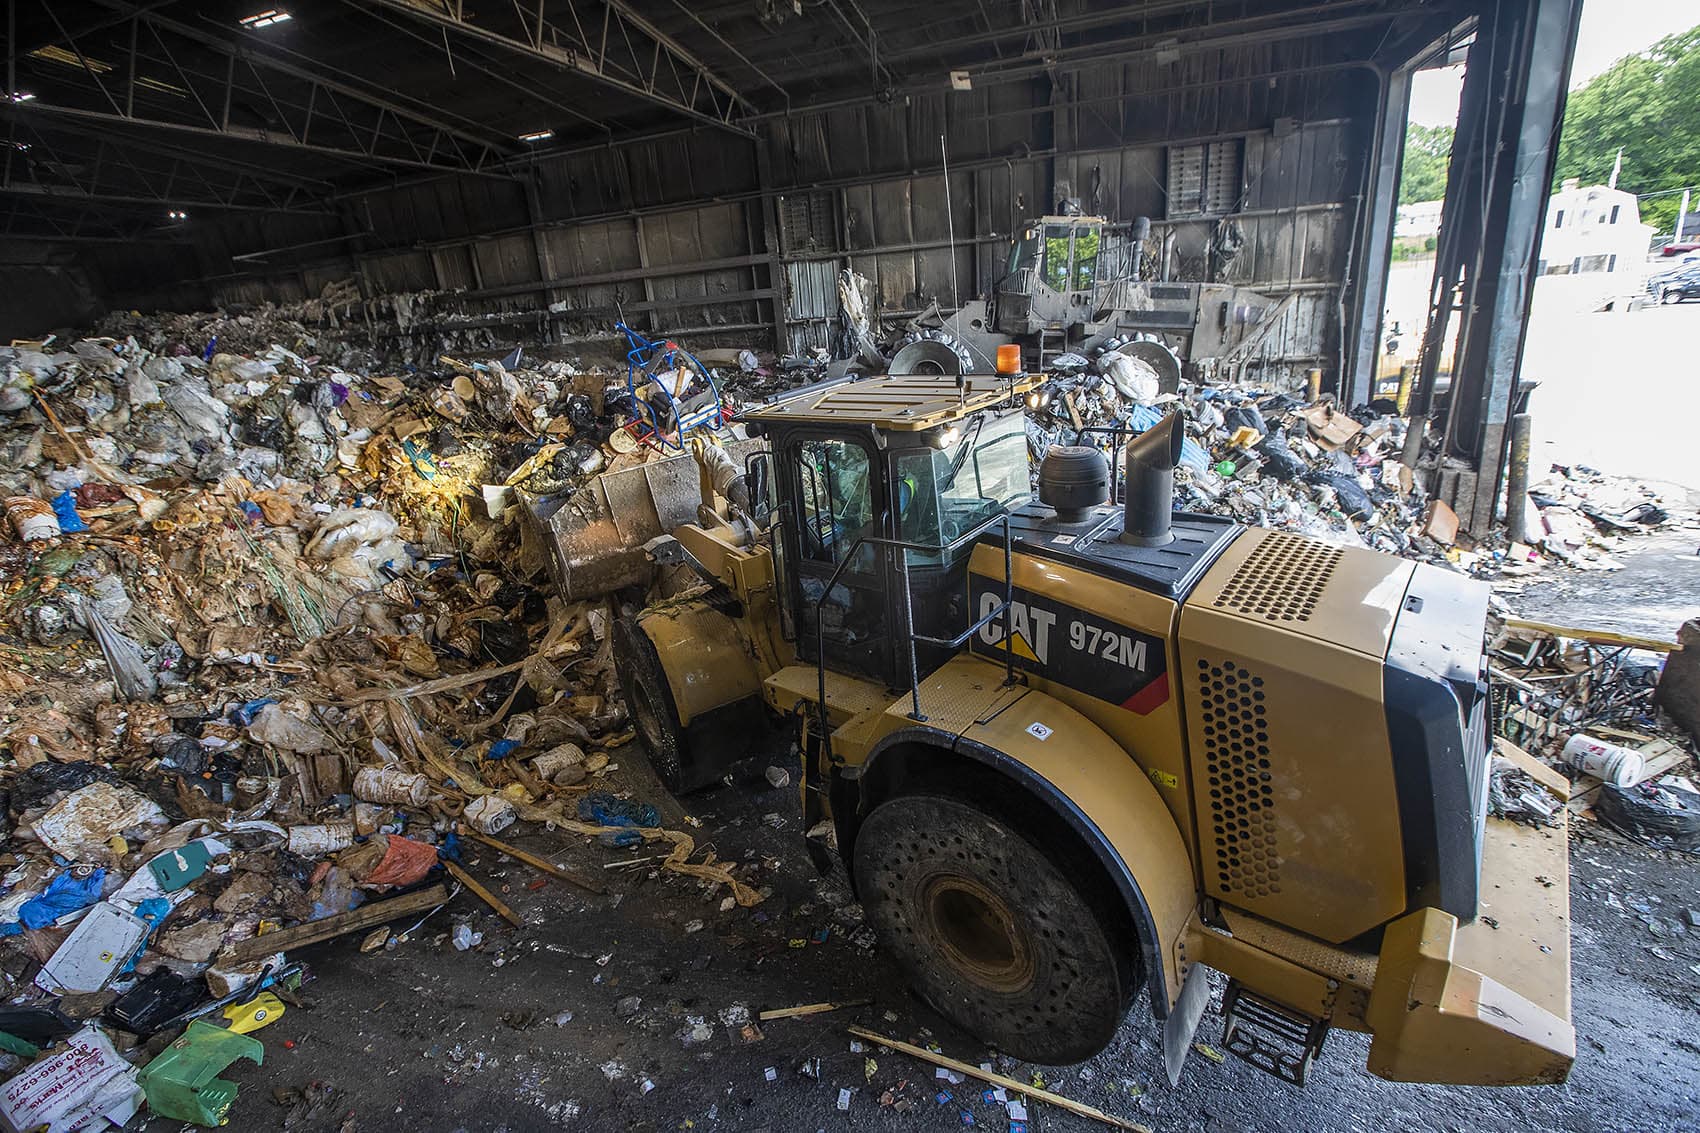 At E.L. Harvey & Sons in Westborough, two land movers push about 1,000 tons of trash into the rear of a warehouse to be baled, packed and shipped out across the country. (Jesse Costa/WBUR)